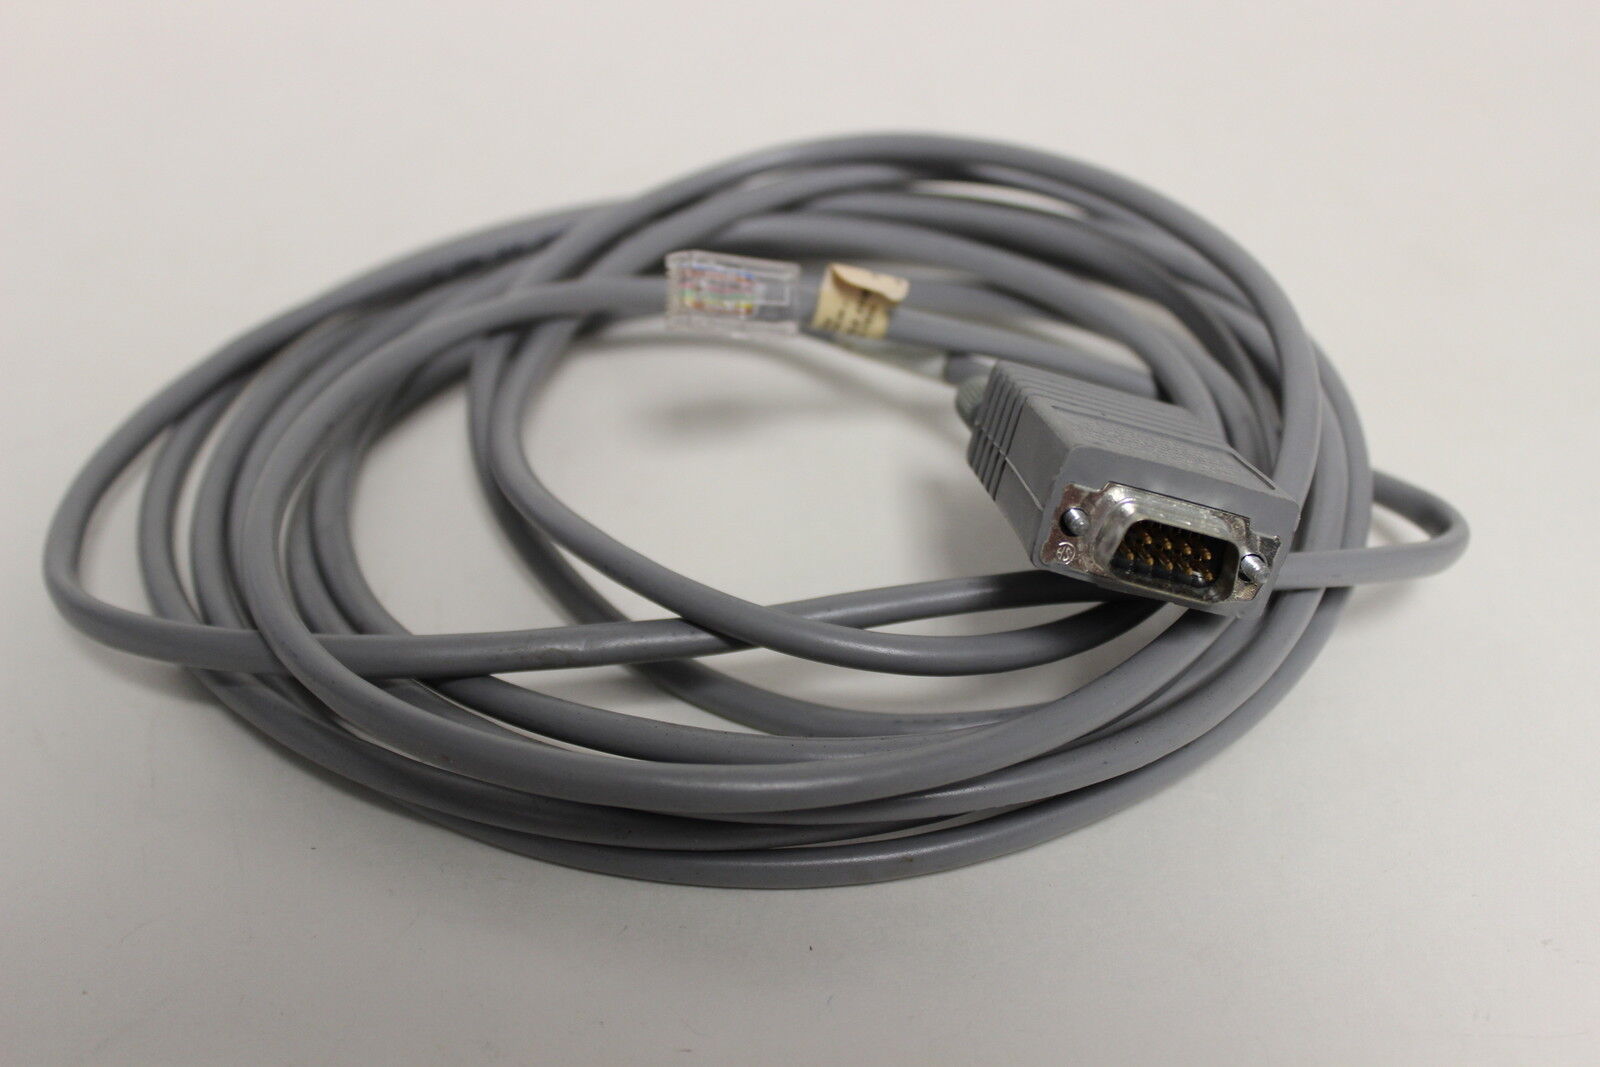 SYNOPTICS 955 TOKEN RING MEDIA FILTER CABLE WITH WARRANTY